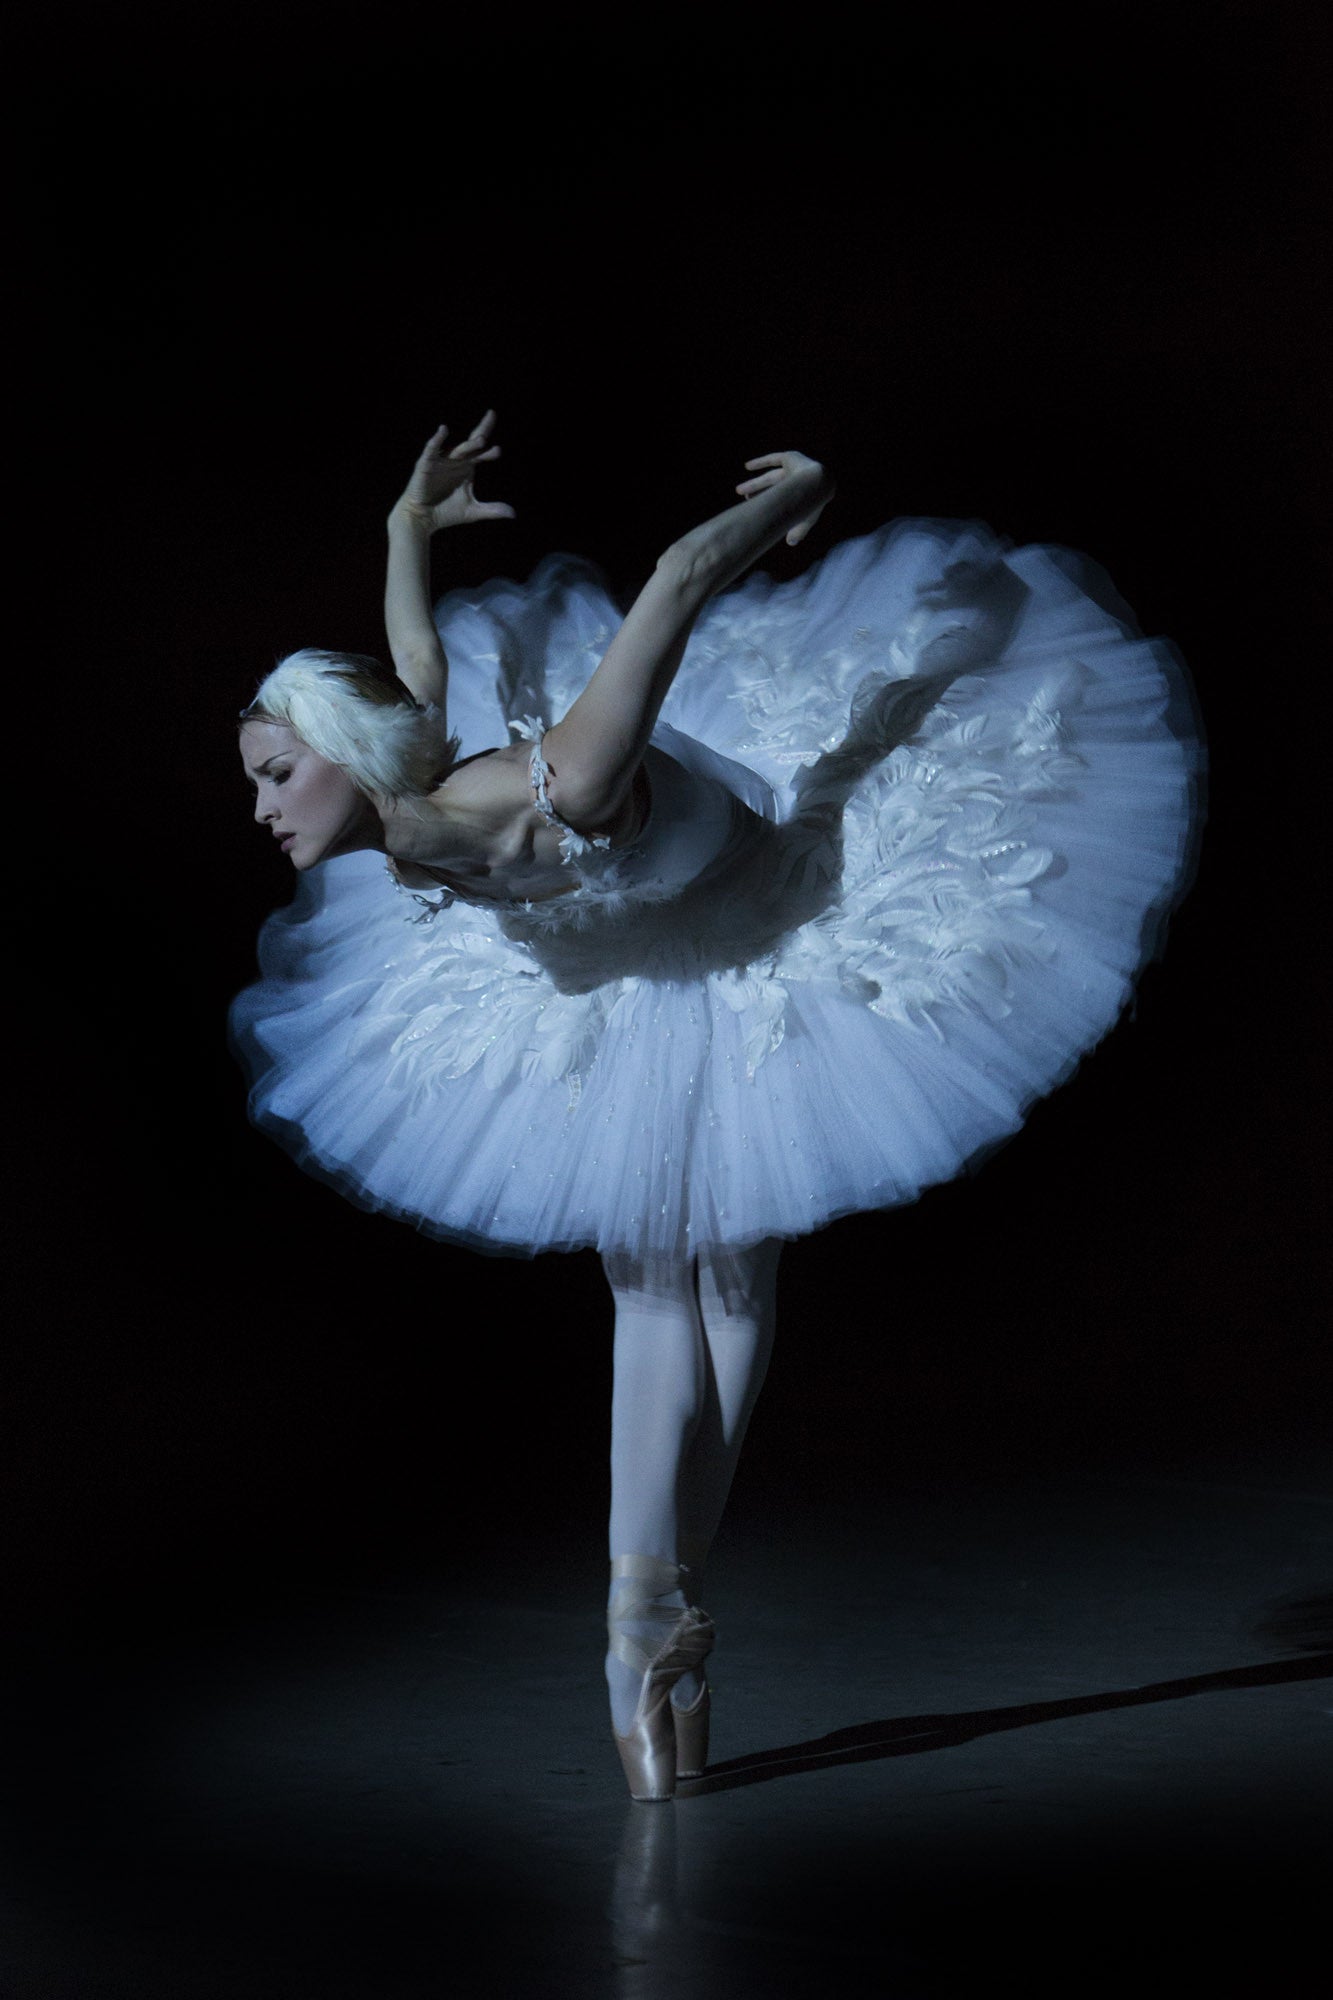 Dying Swan 4